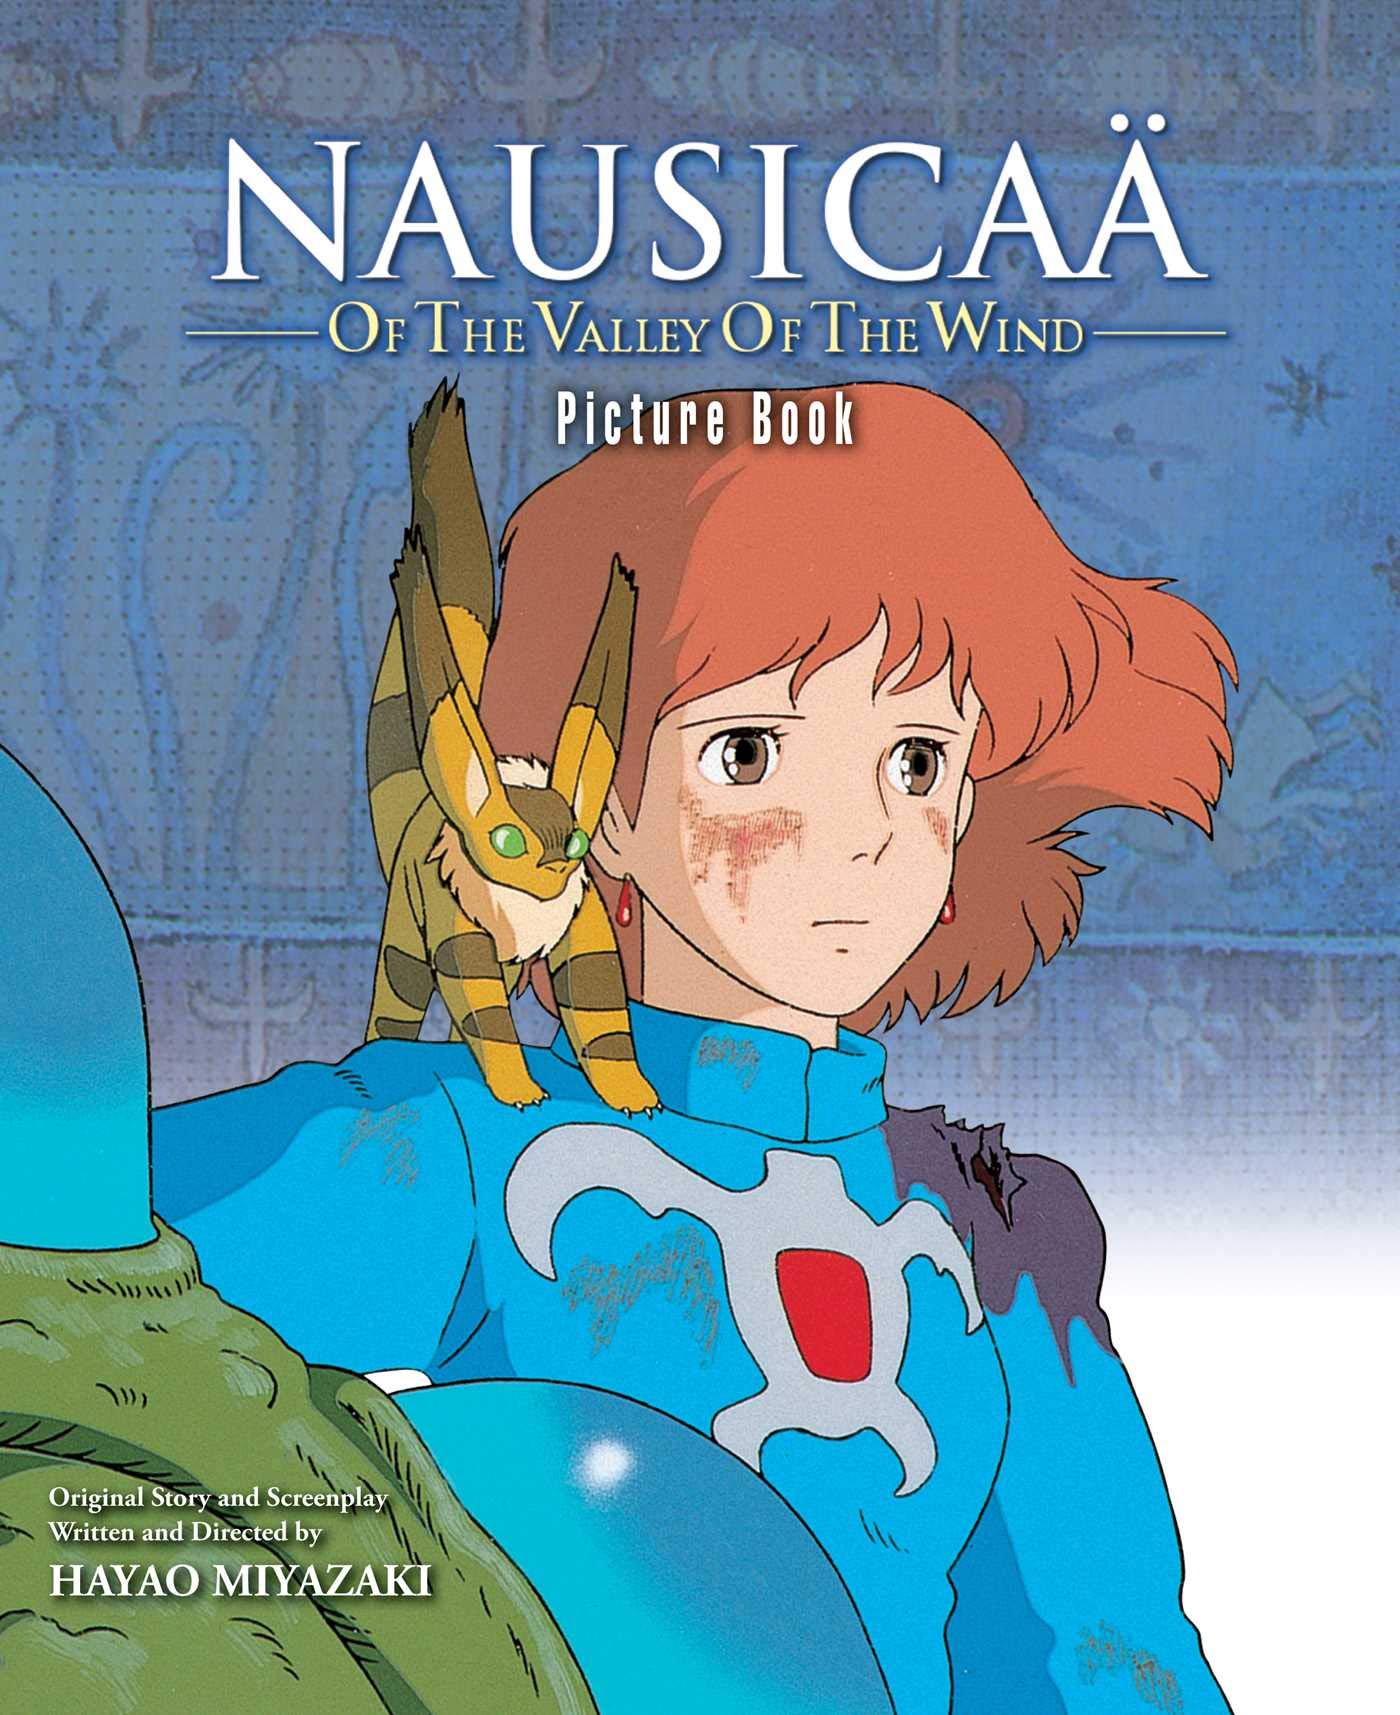 naussiaa of the valley of wind in english dubb free download in mp4